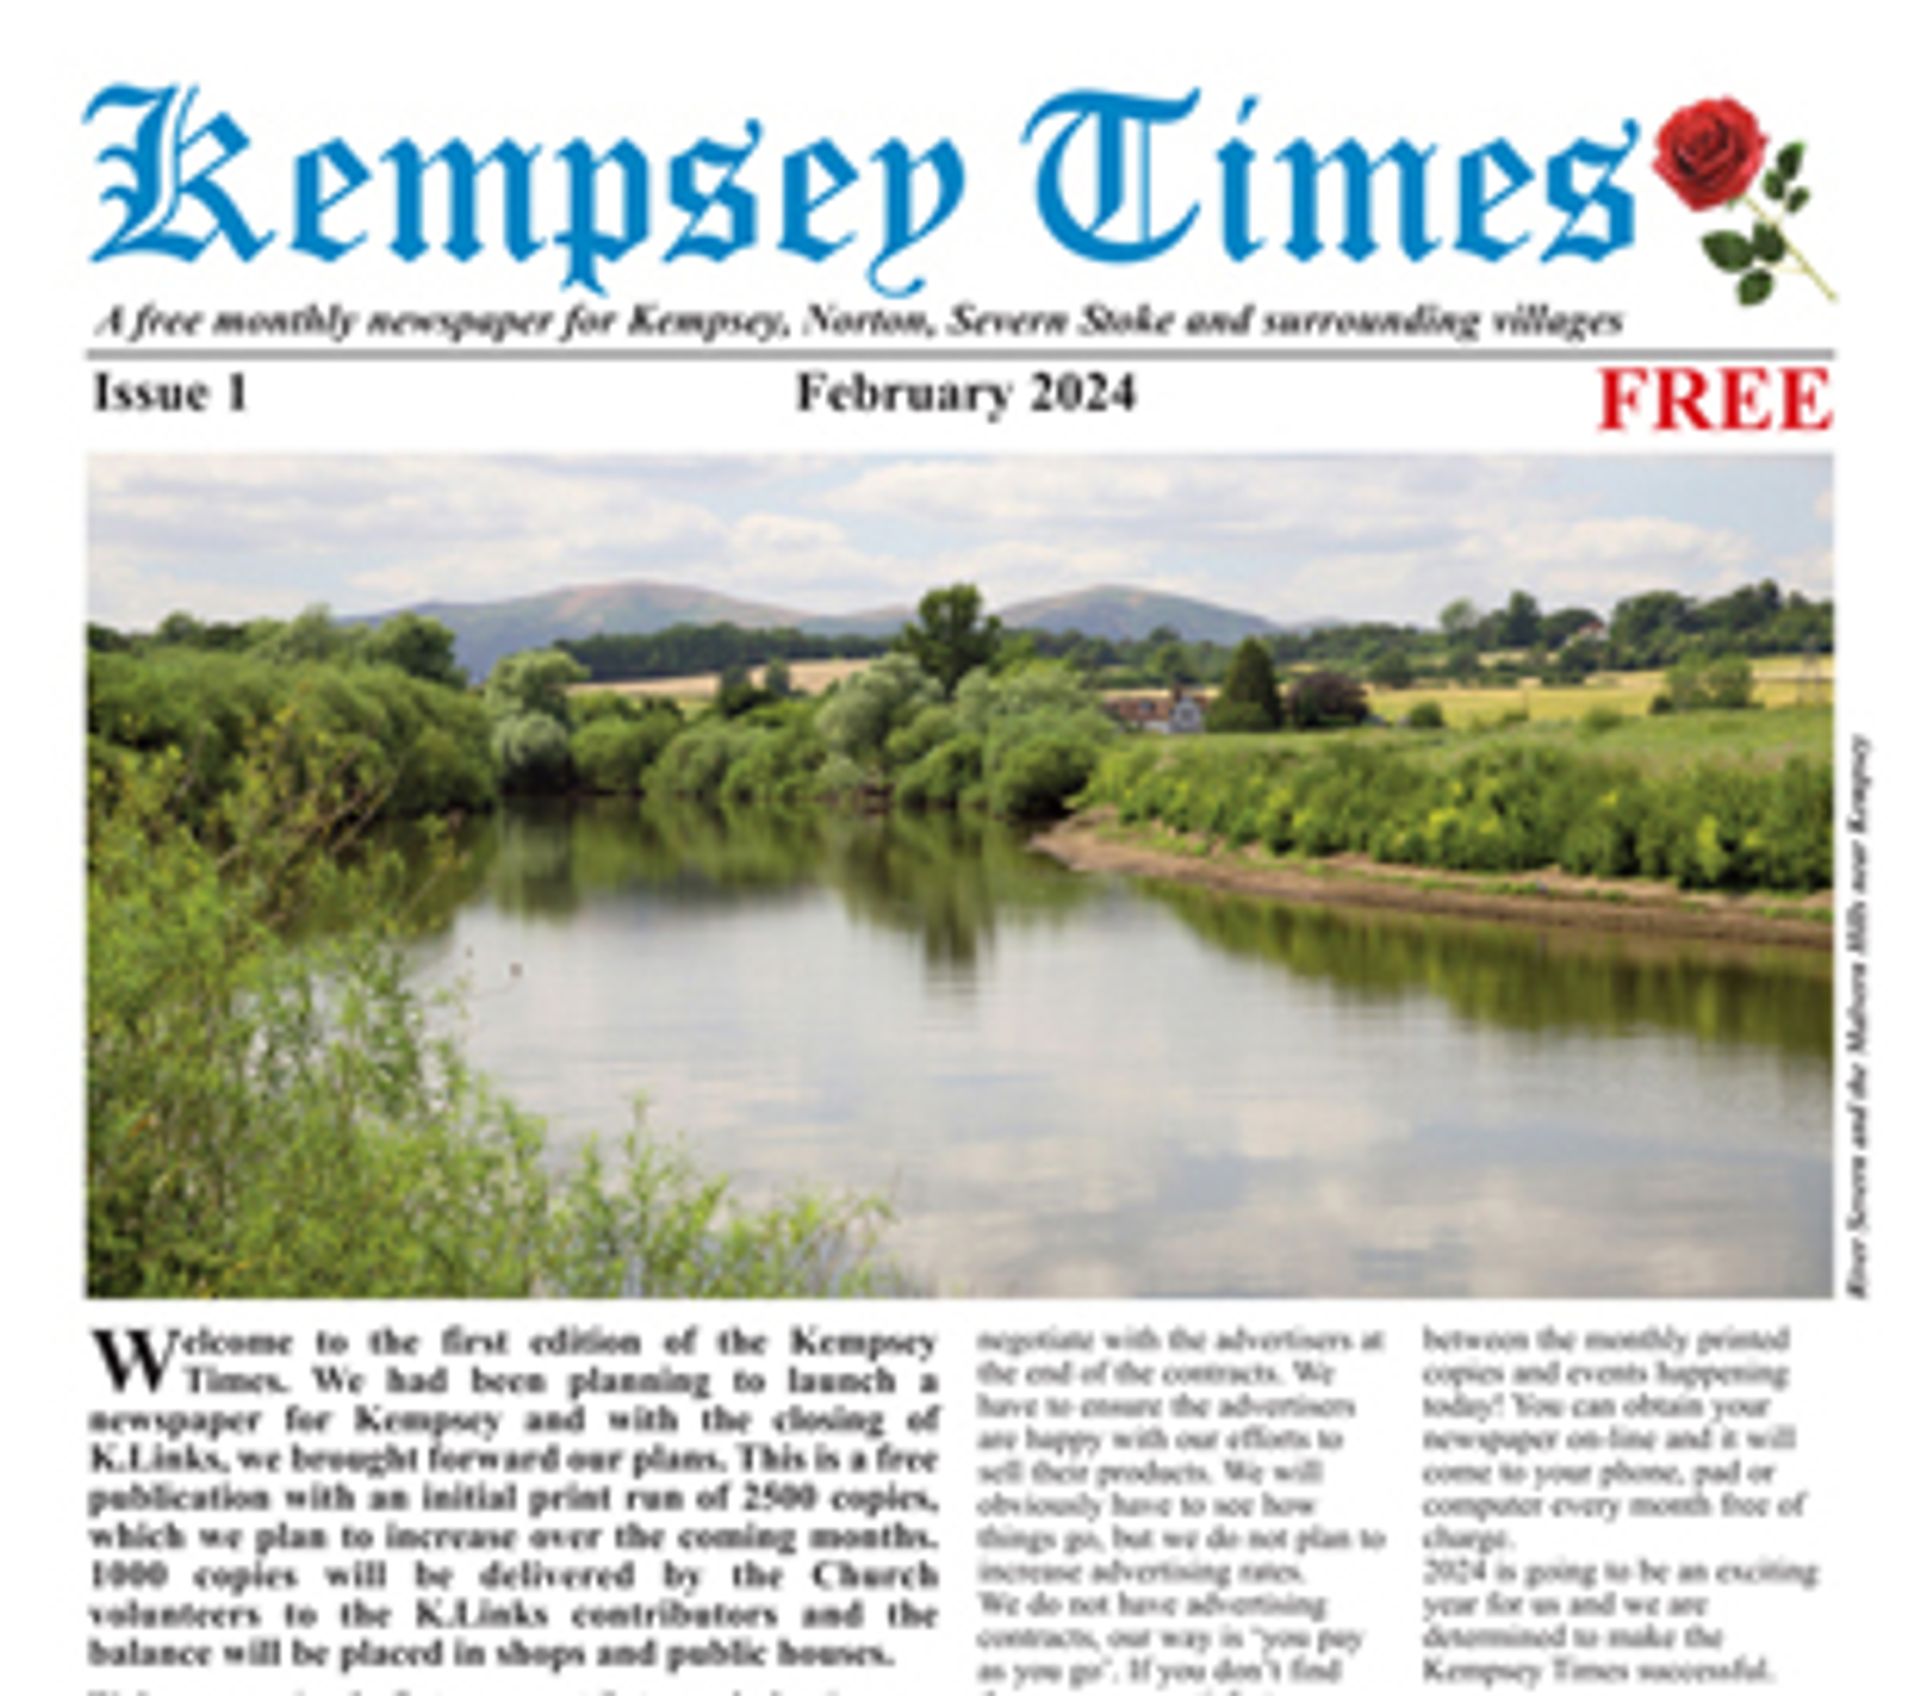 Kempsey Times Issue 1